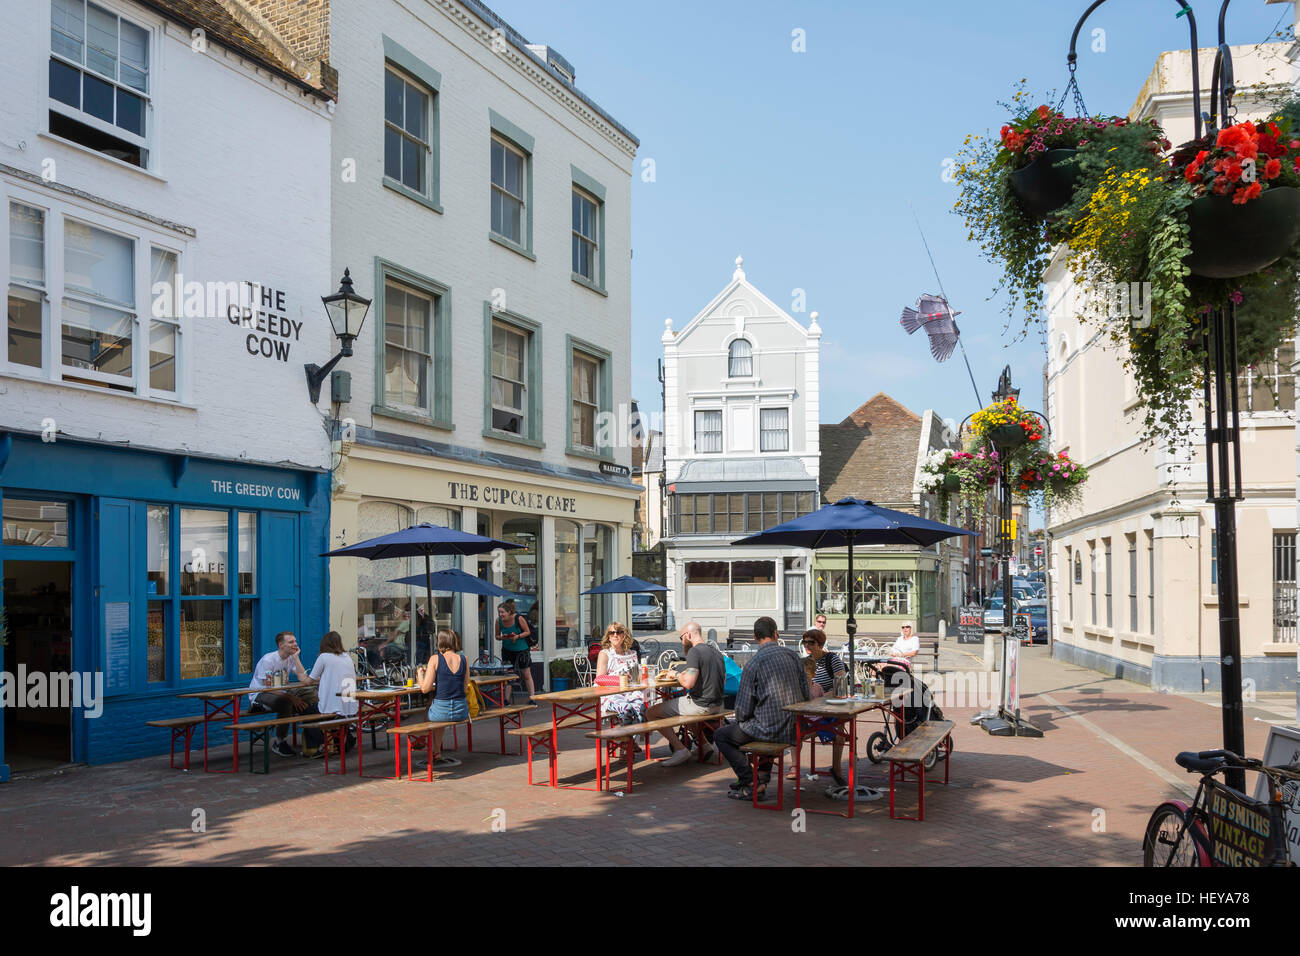 Outdoor seating at The Cupcake and Greedy Cow cafes, Market Place, Old Town, Margate, Kent, England, United Kingdom Stock Photo